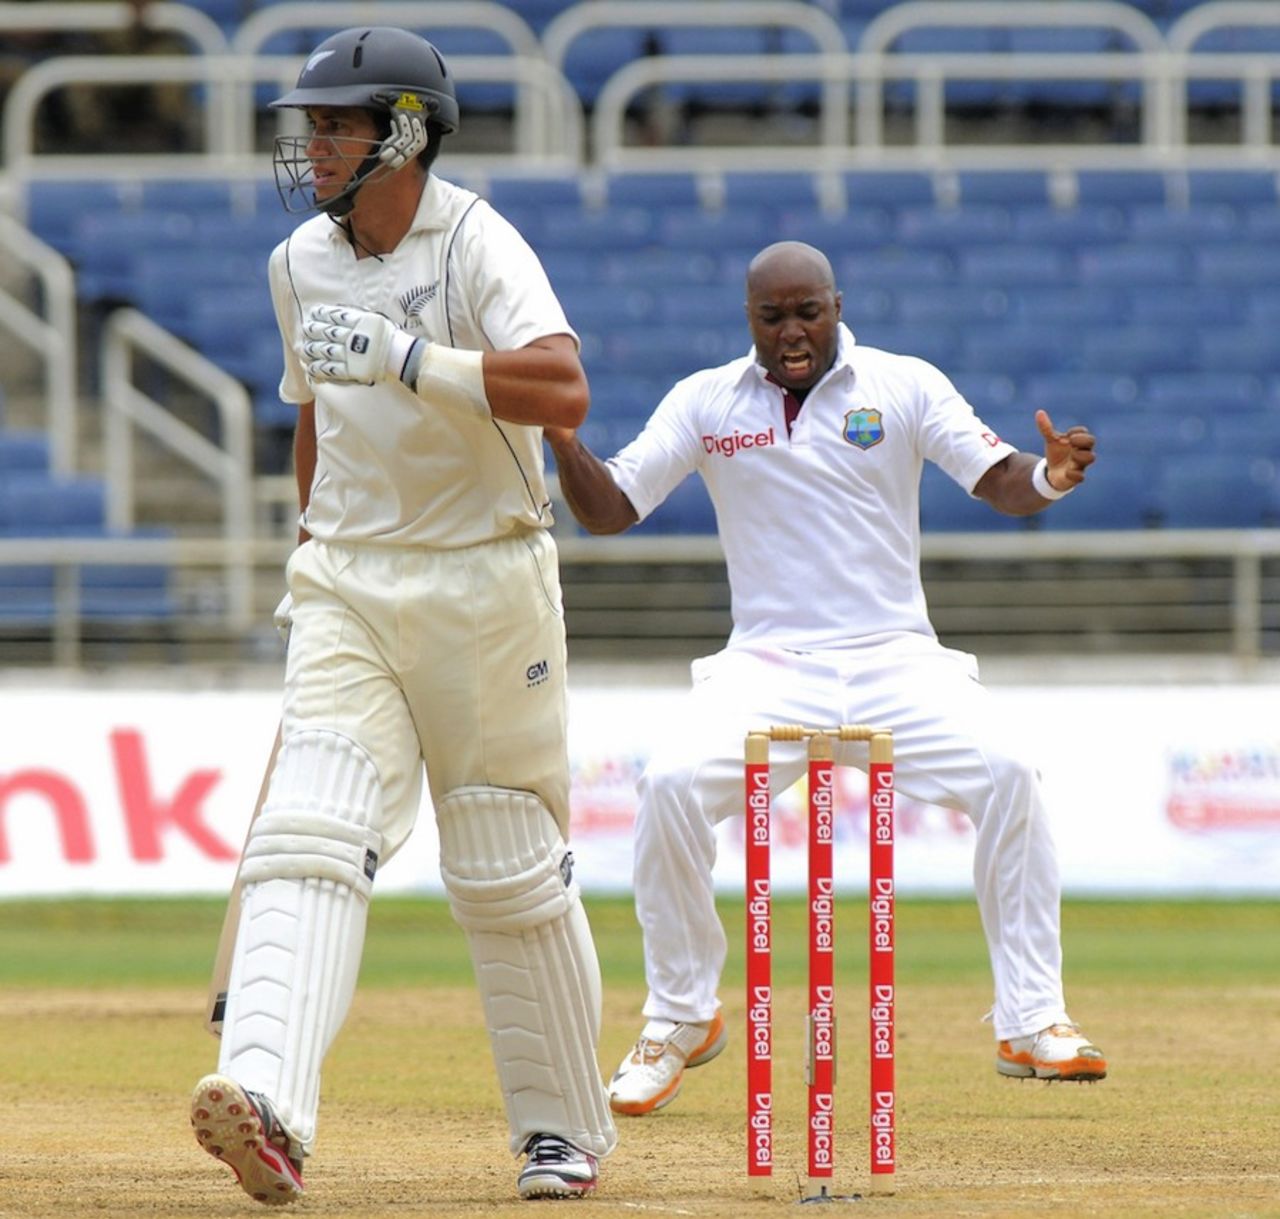 Tino Best celebrates Ross Taylor's wicket, West Indies v New Zealand, 2nd Test, Jamaica, 1st day, August 2, 2012